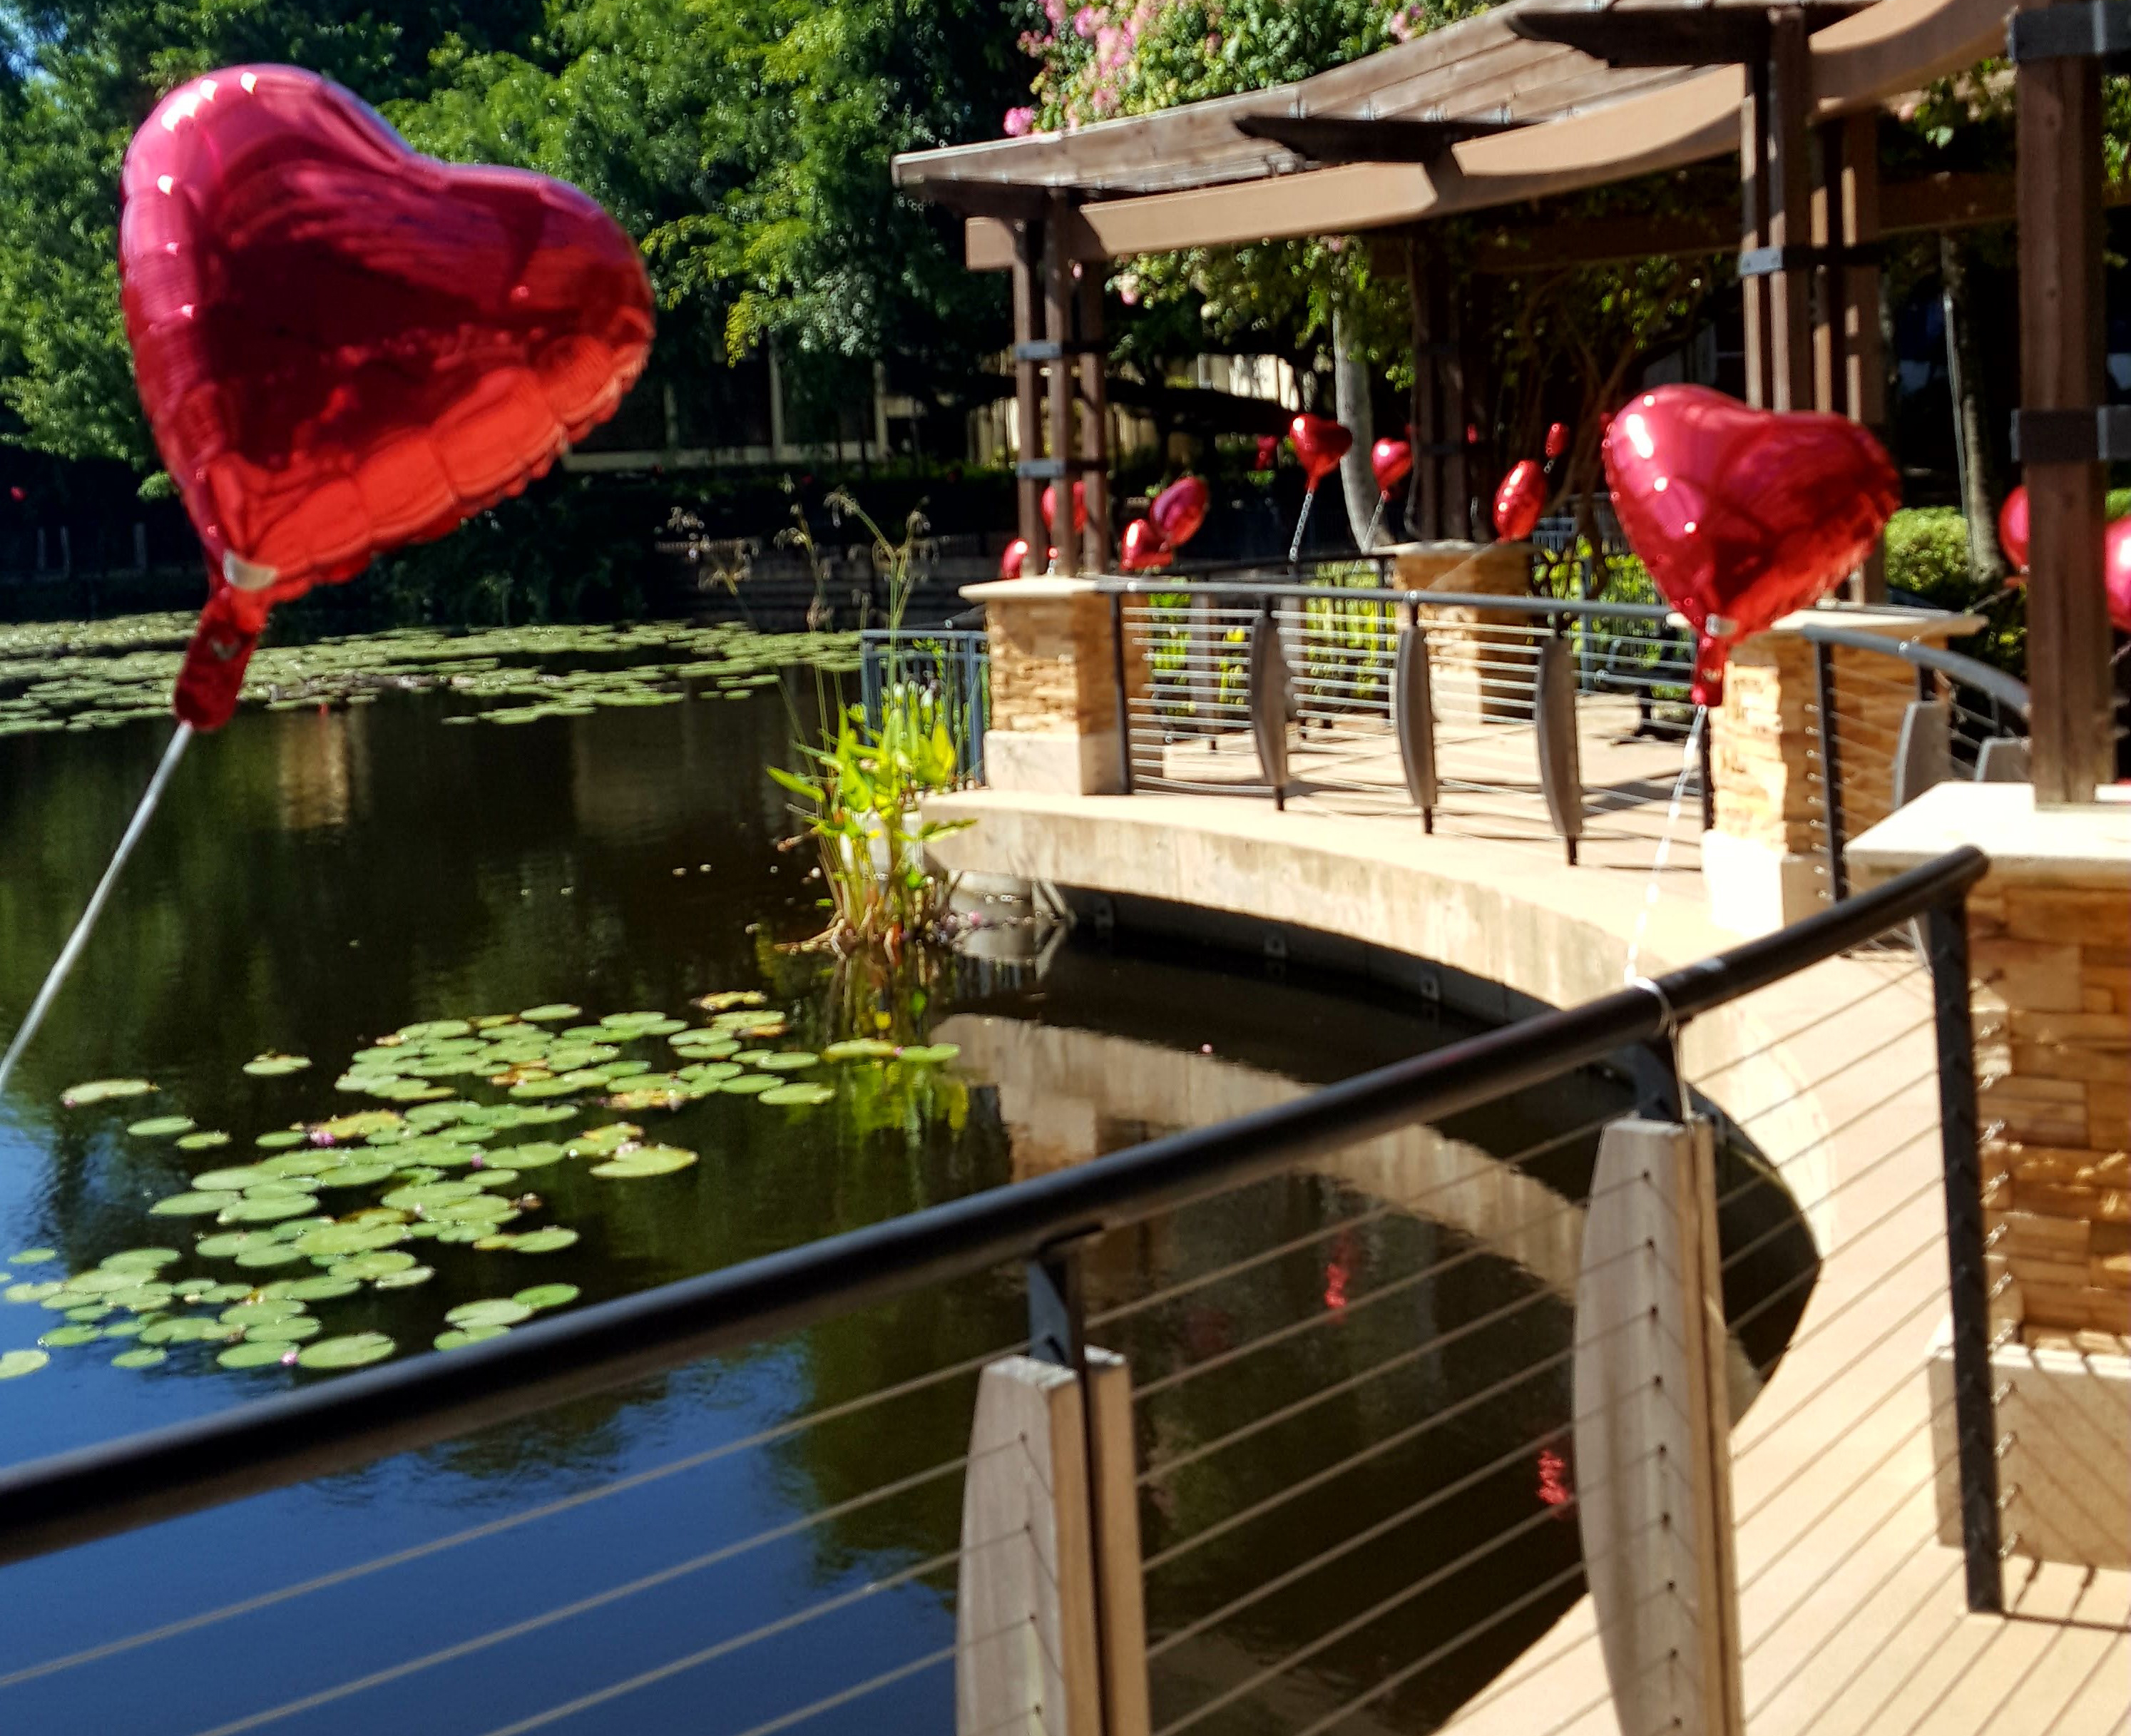 Heart balloons by a pond